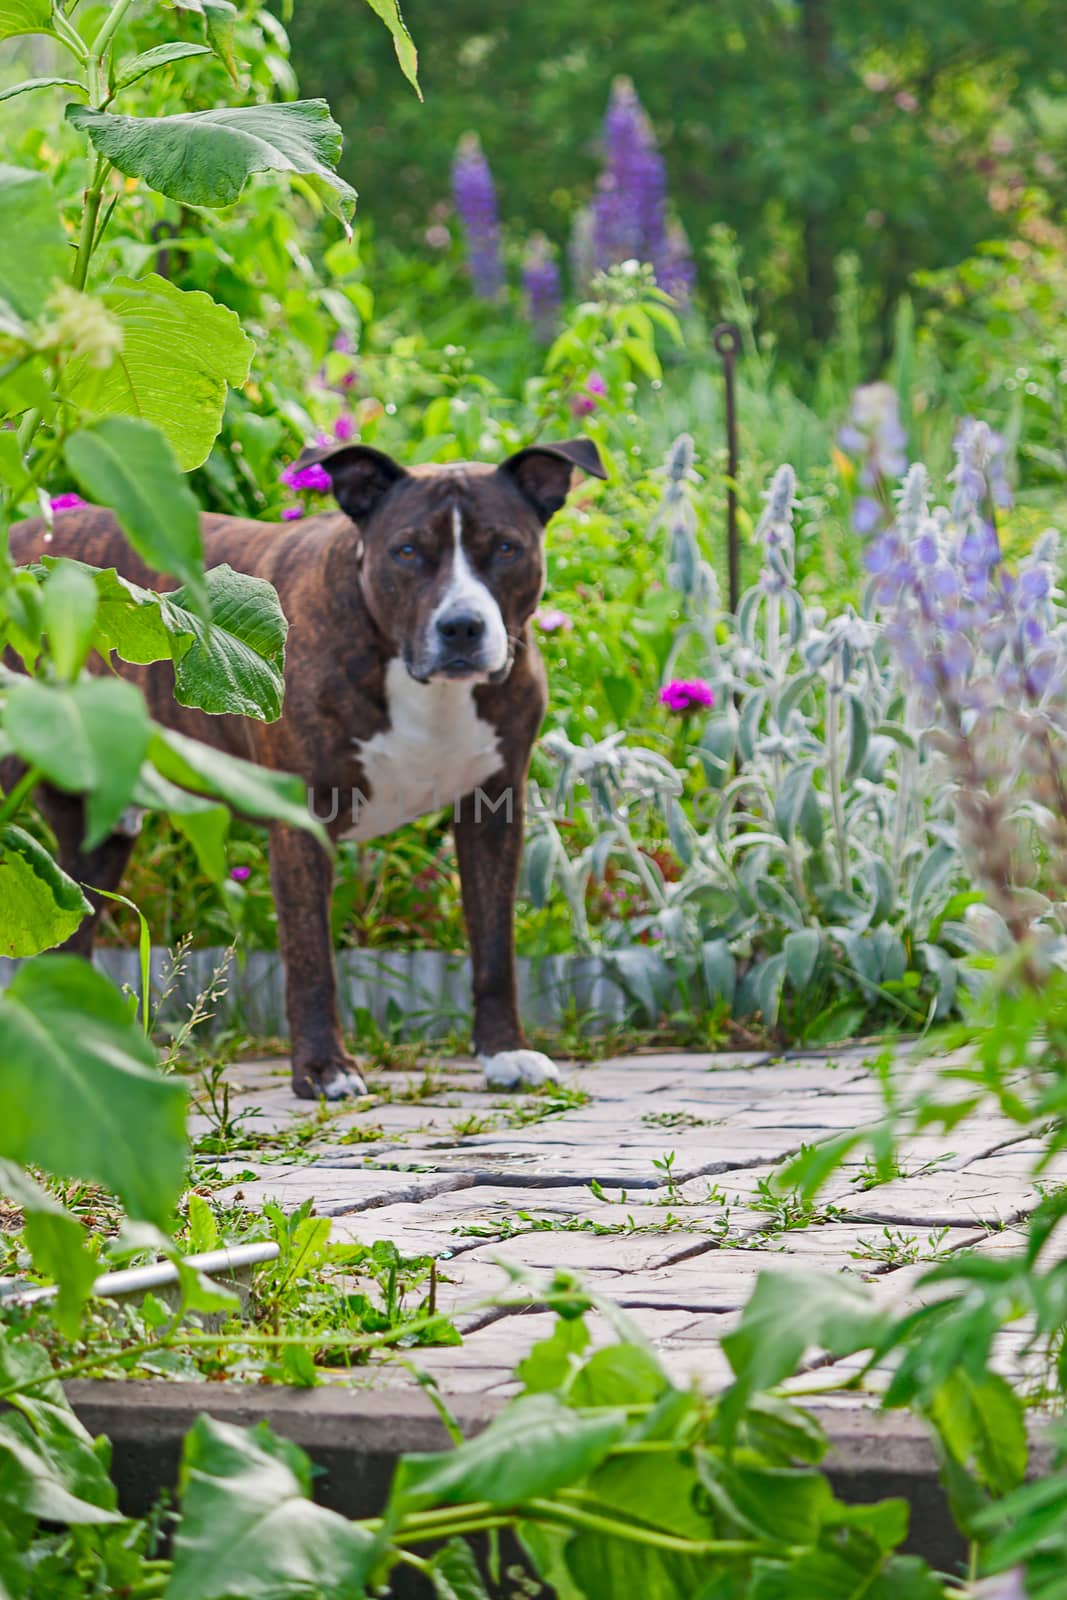 The dog in the background on a footpath in a garden near the plants.